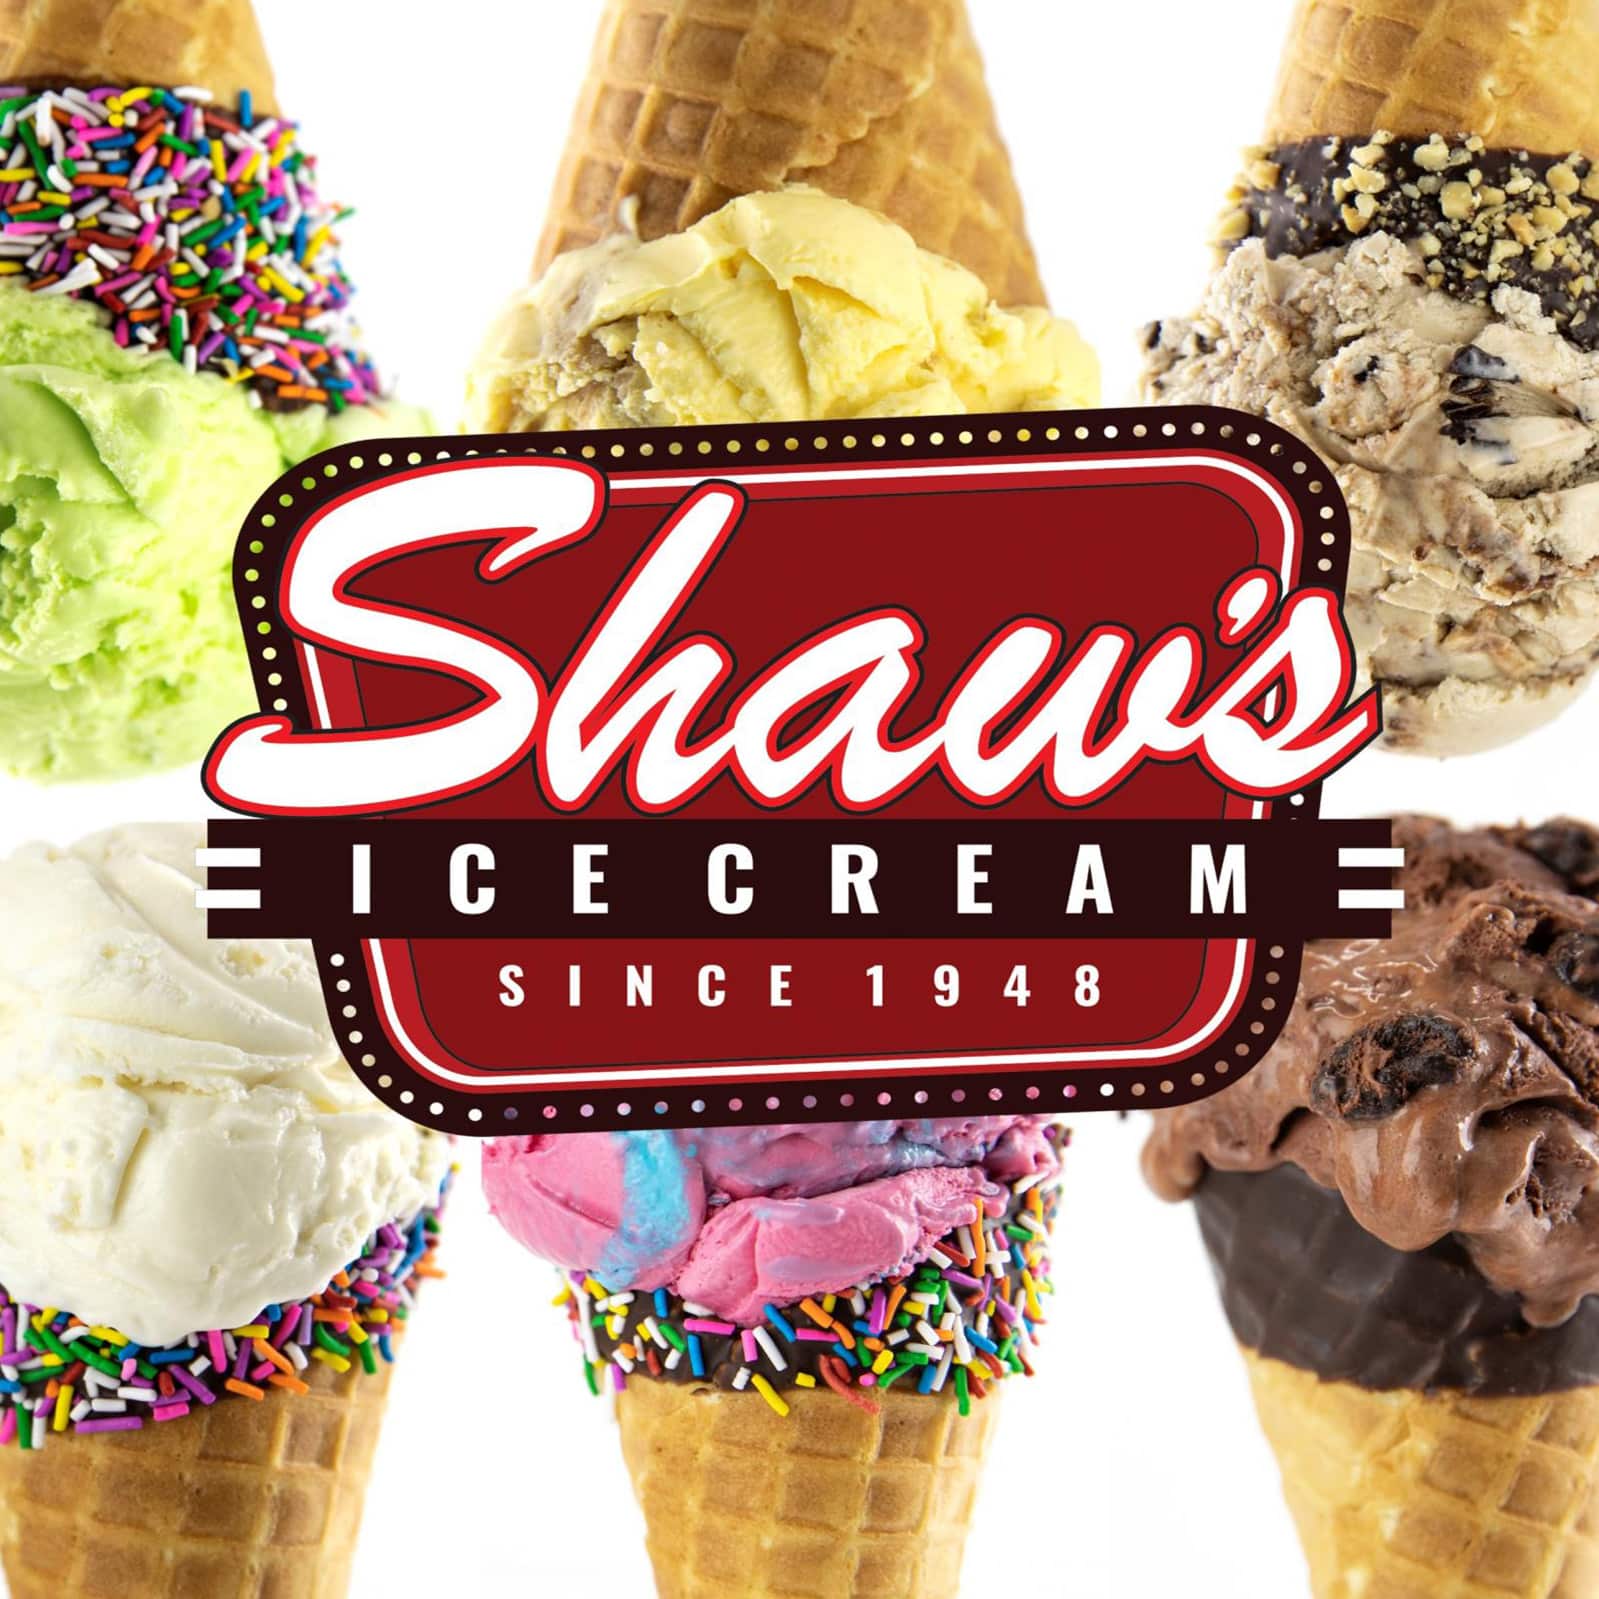 shaws ice cream from wholesale distributor transcold distribution